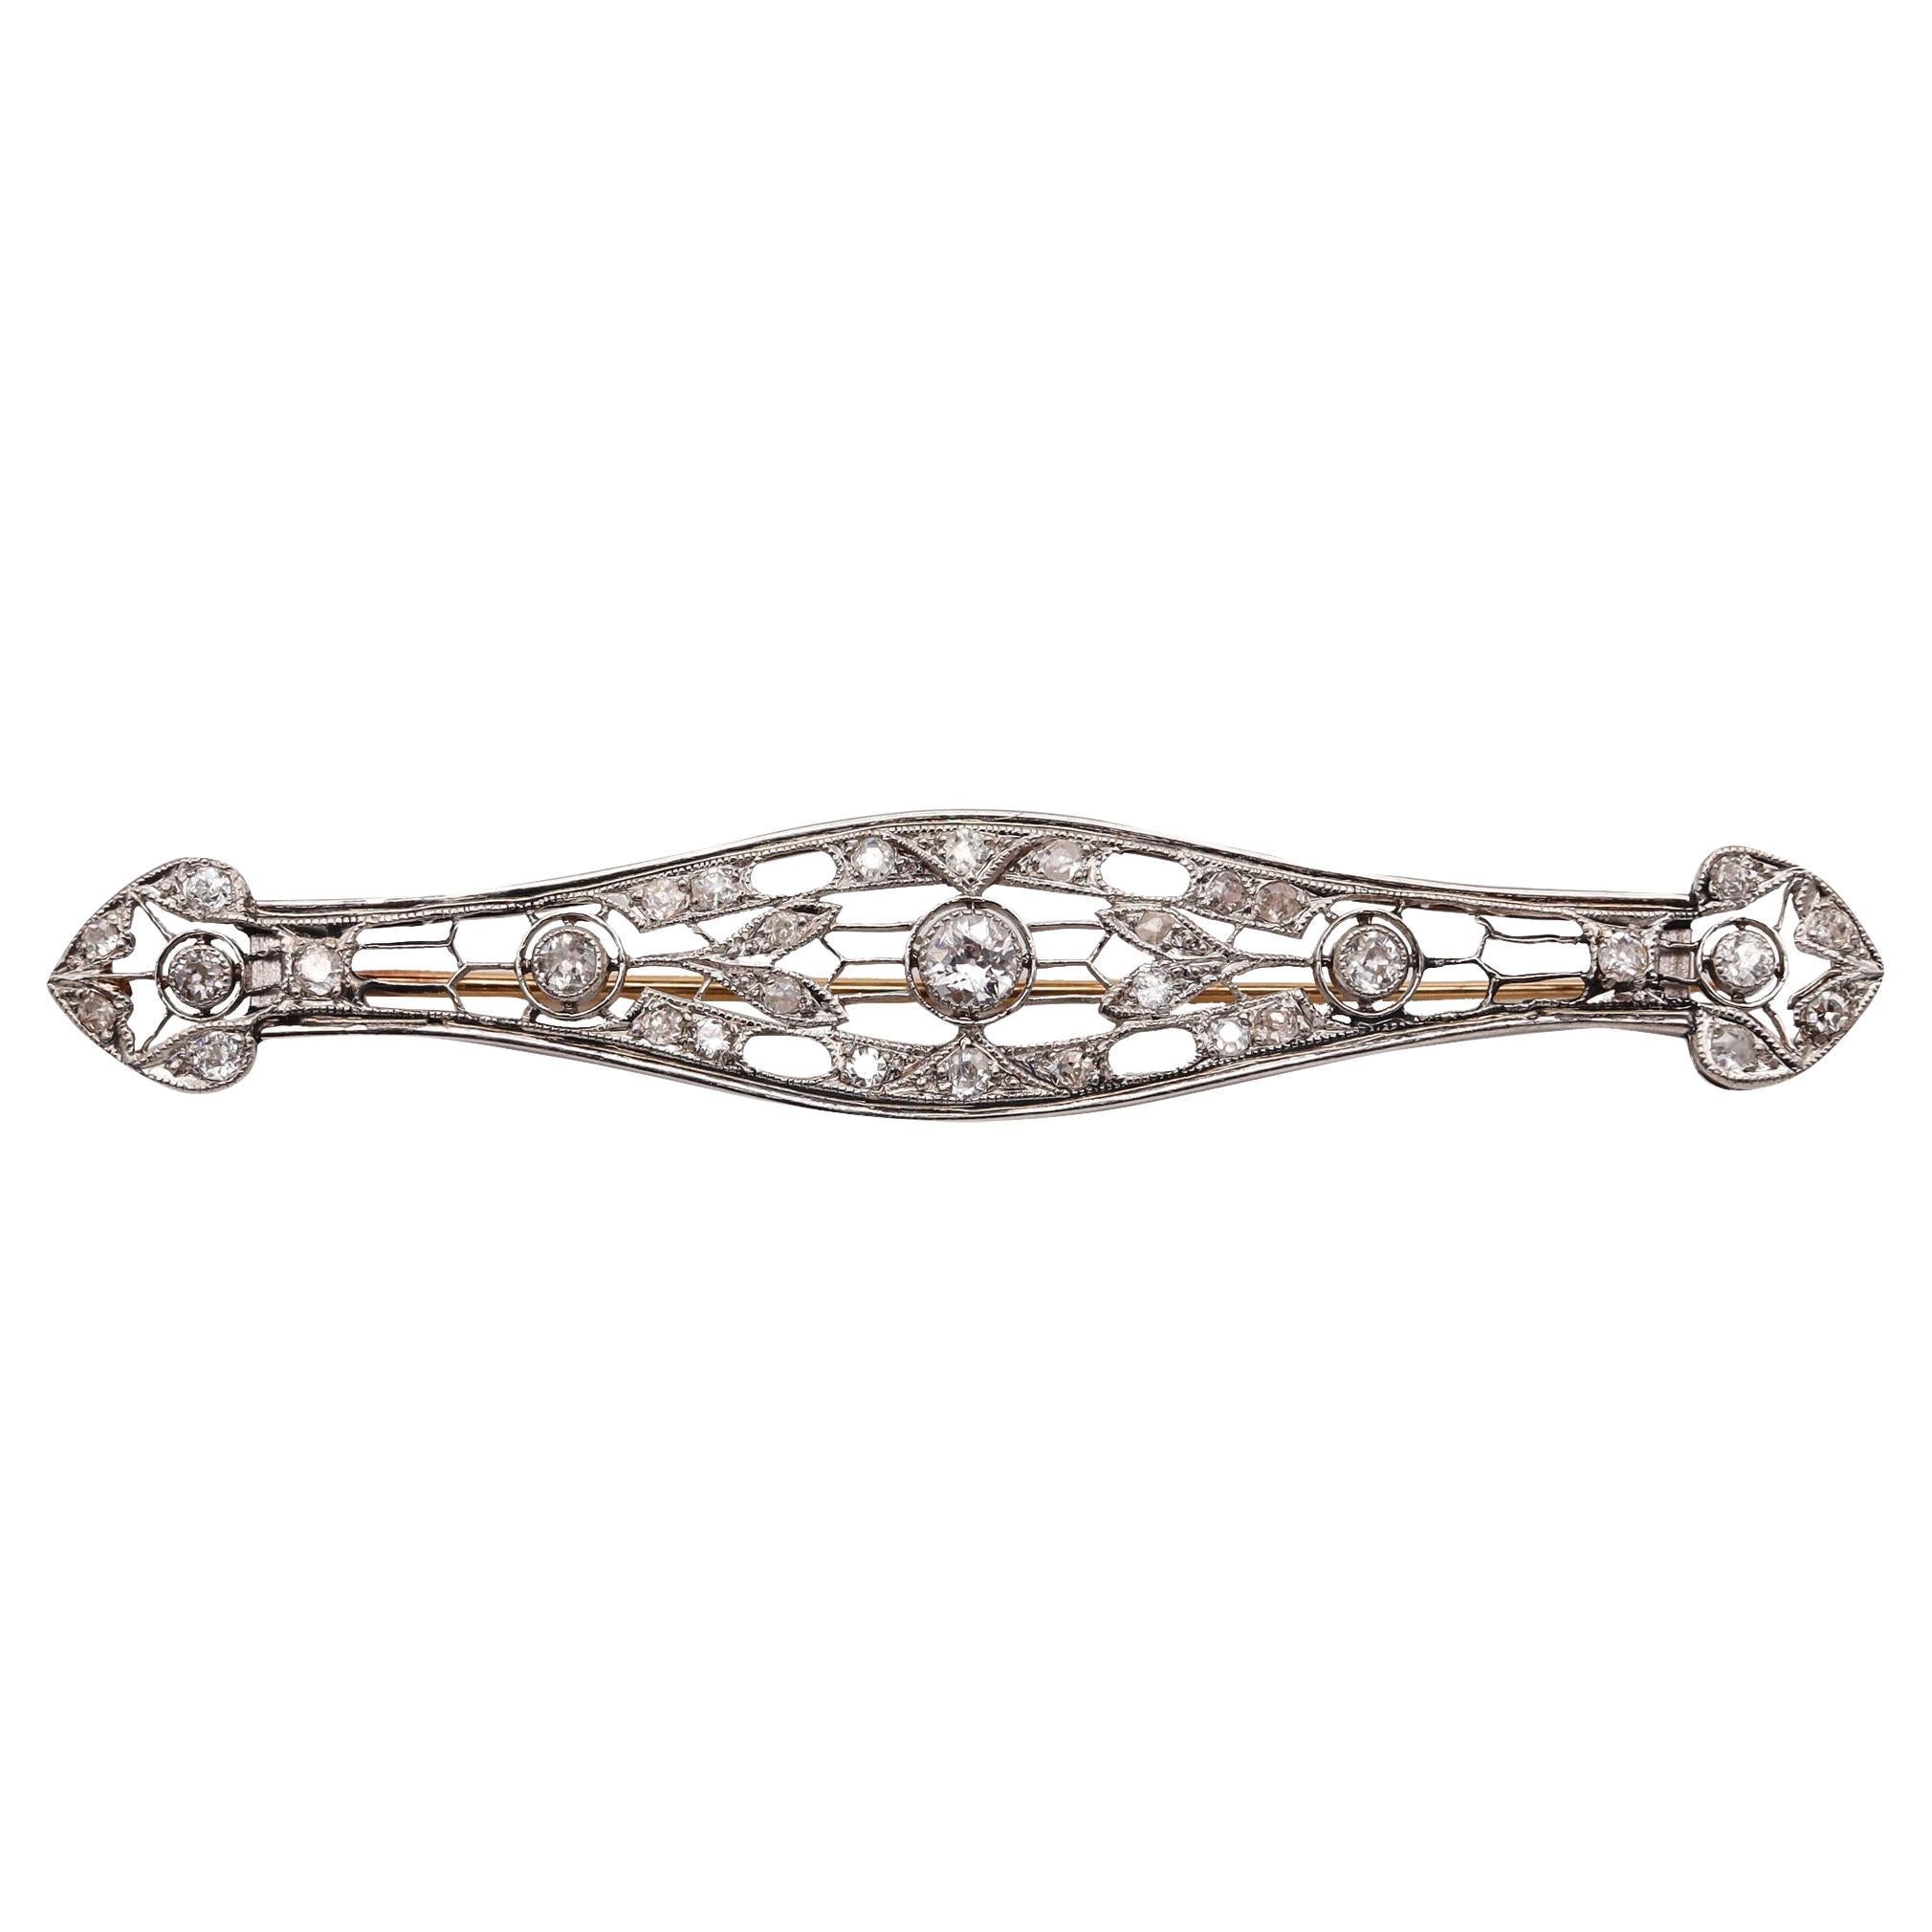 Art Deco 1930 Elongated Classic Brooch In Platinum With 2.38 Ctw In Diamonds For Sale